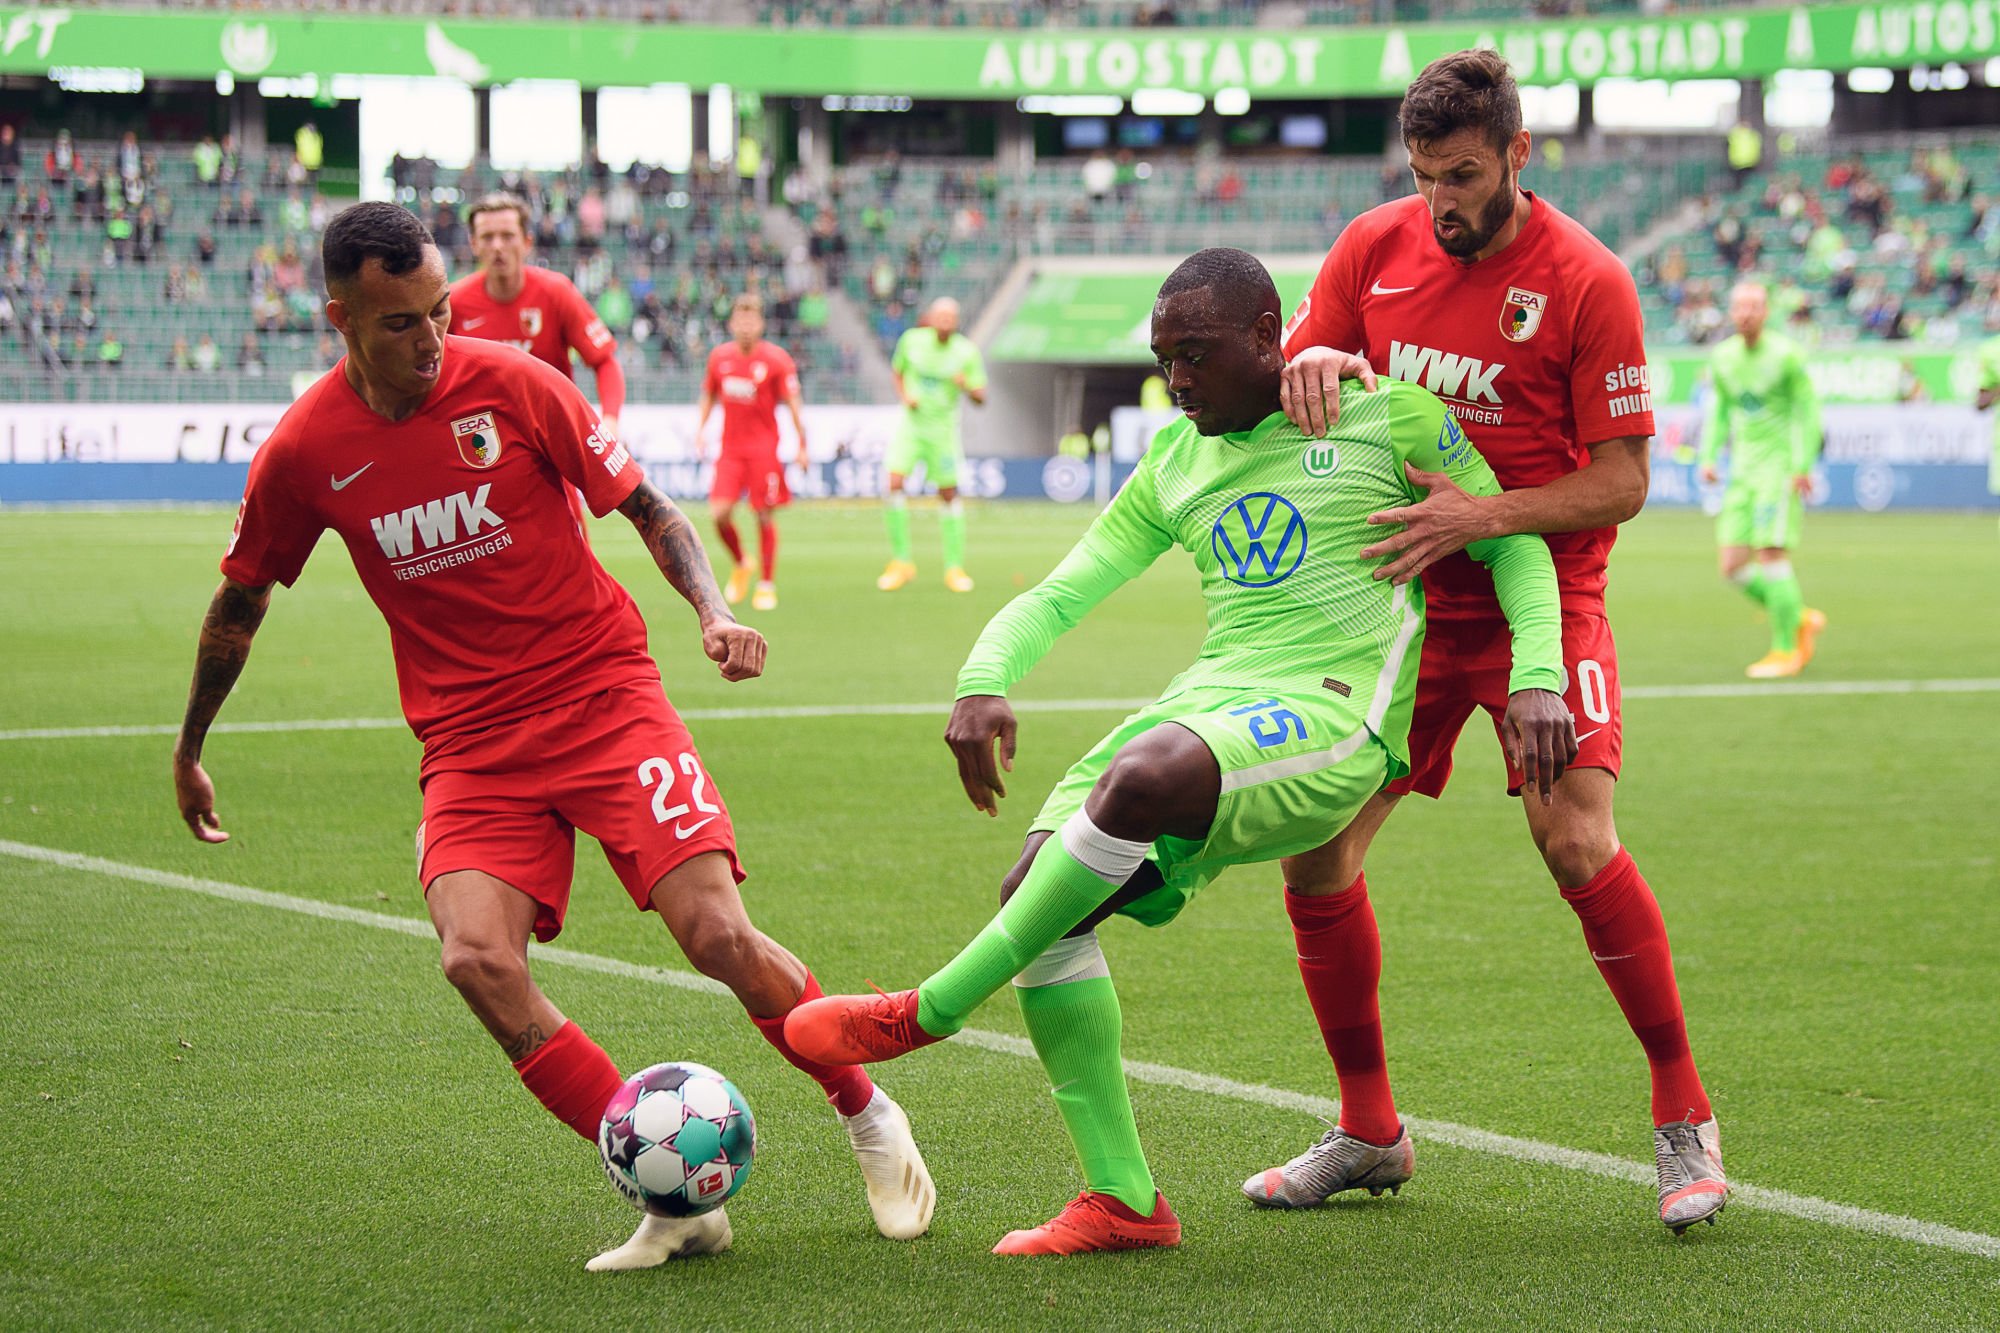 04 October 2020, Lower Saxony, Wolfsburg: Football: Bundesliga, VfL Wolfsburg - FC Augsburg, 3rd matchday in the Volkswagen Arena. Wolfsburg's JÈrÙme Roussillon (M) plays against Augsburg's Amarat Borduchi Iago (l) and Augsburg's Daniel Caligiuri. Photo: Swen Pfˆrtner/dpa - IMPORTANT NOTE: In accordance with the regulations of the DFL Deutsche Fu?ball Liga and the DFB Deutscher Fu?ball-Bund, it is prohibited to exploit or have exploited in the stadium and/or from the game taken photographs in the form of sequence images and/or video-like photo series. 
Photo by Icon Sport - Volkswagen Arena - Wolfsbourg (Allemagne)